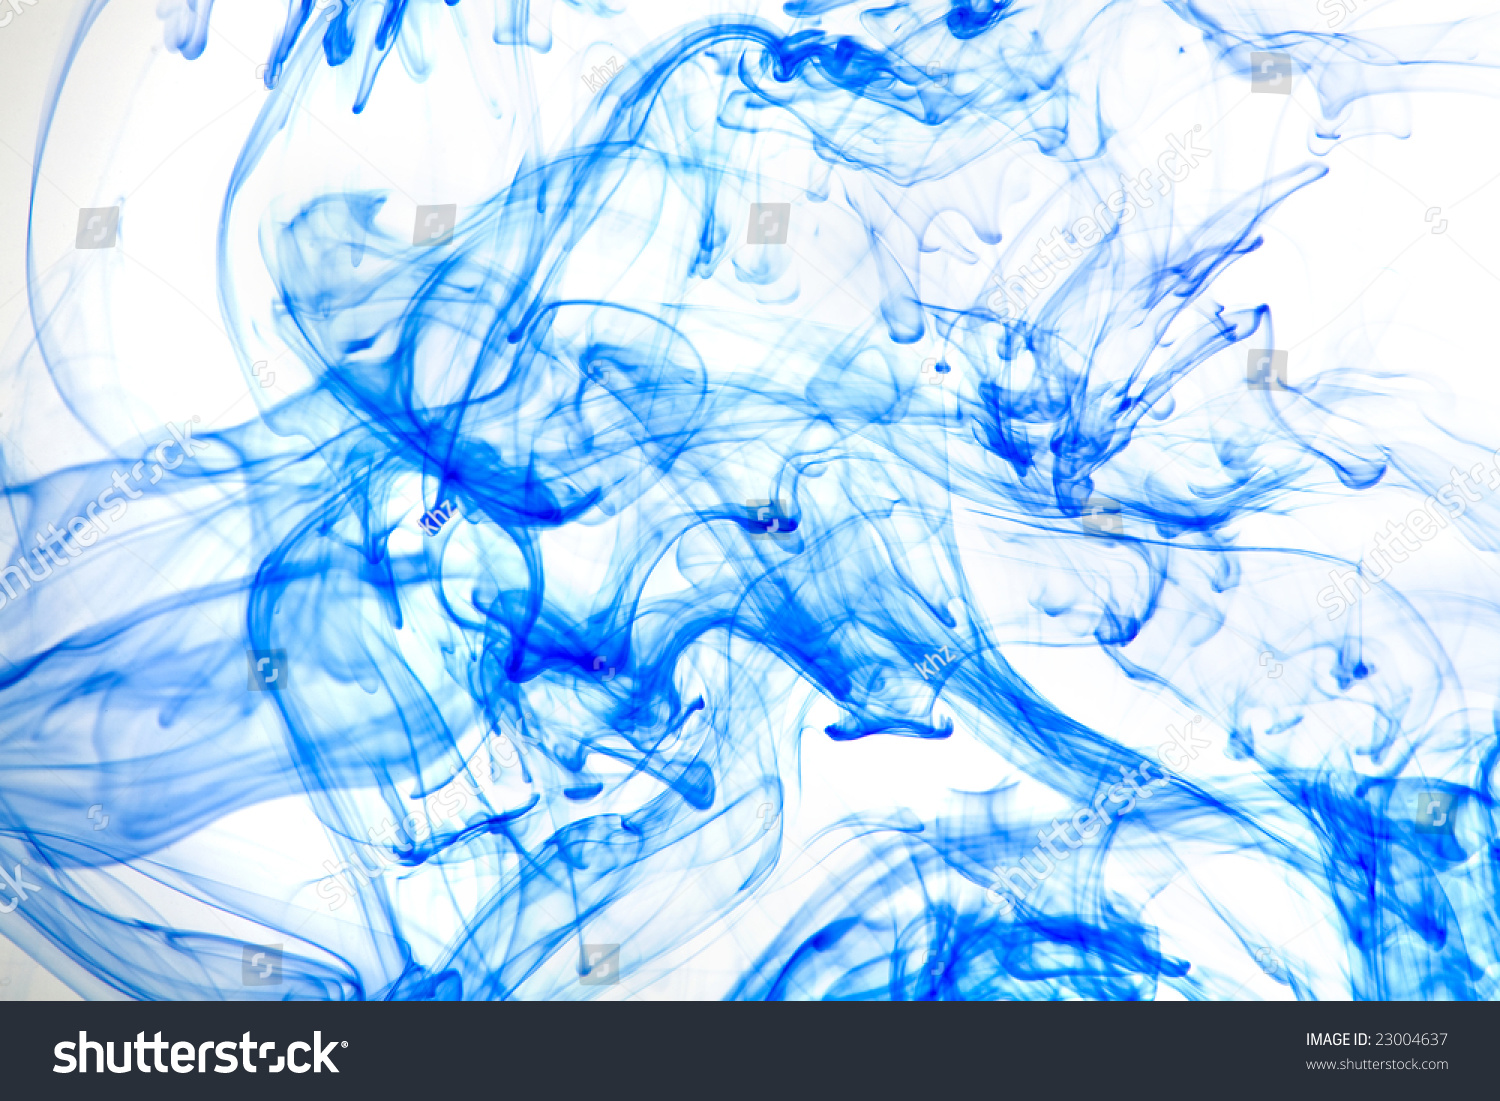 Abstract Blue Ink Background In Water Stock Photo 23004637 : Shutterstock